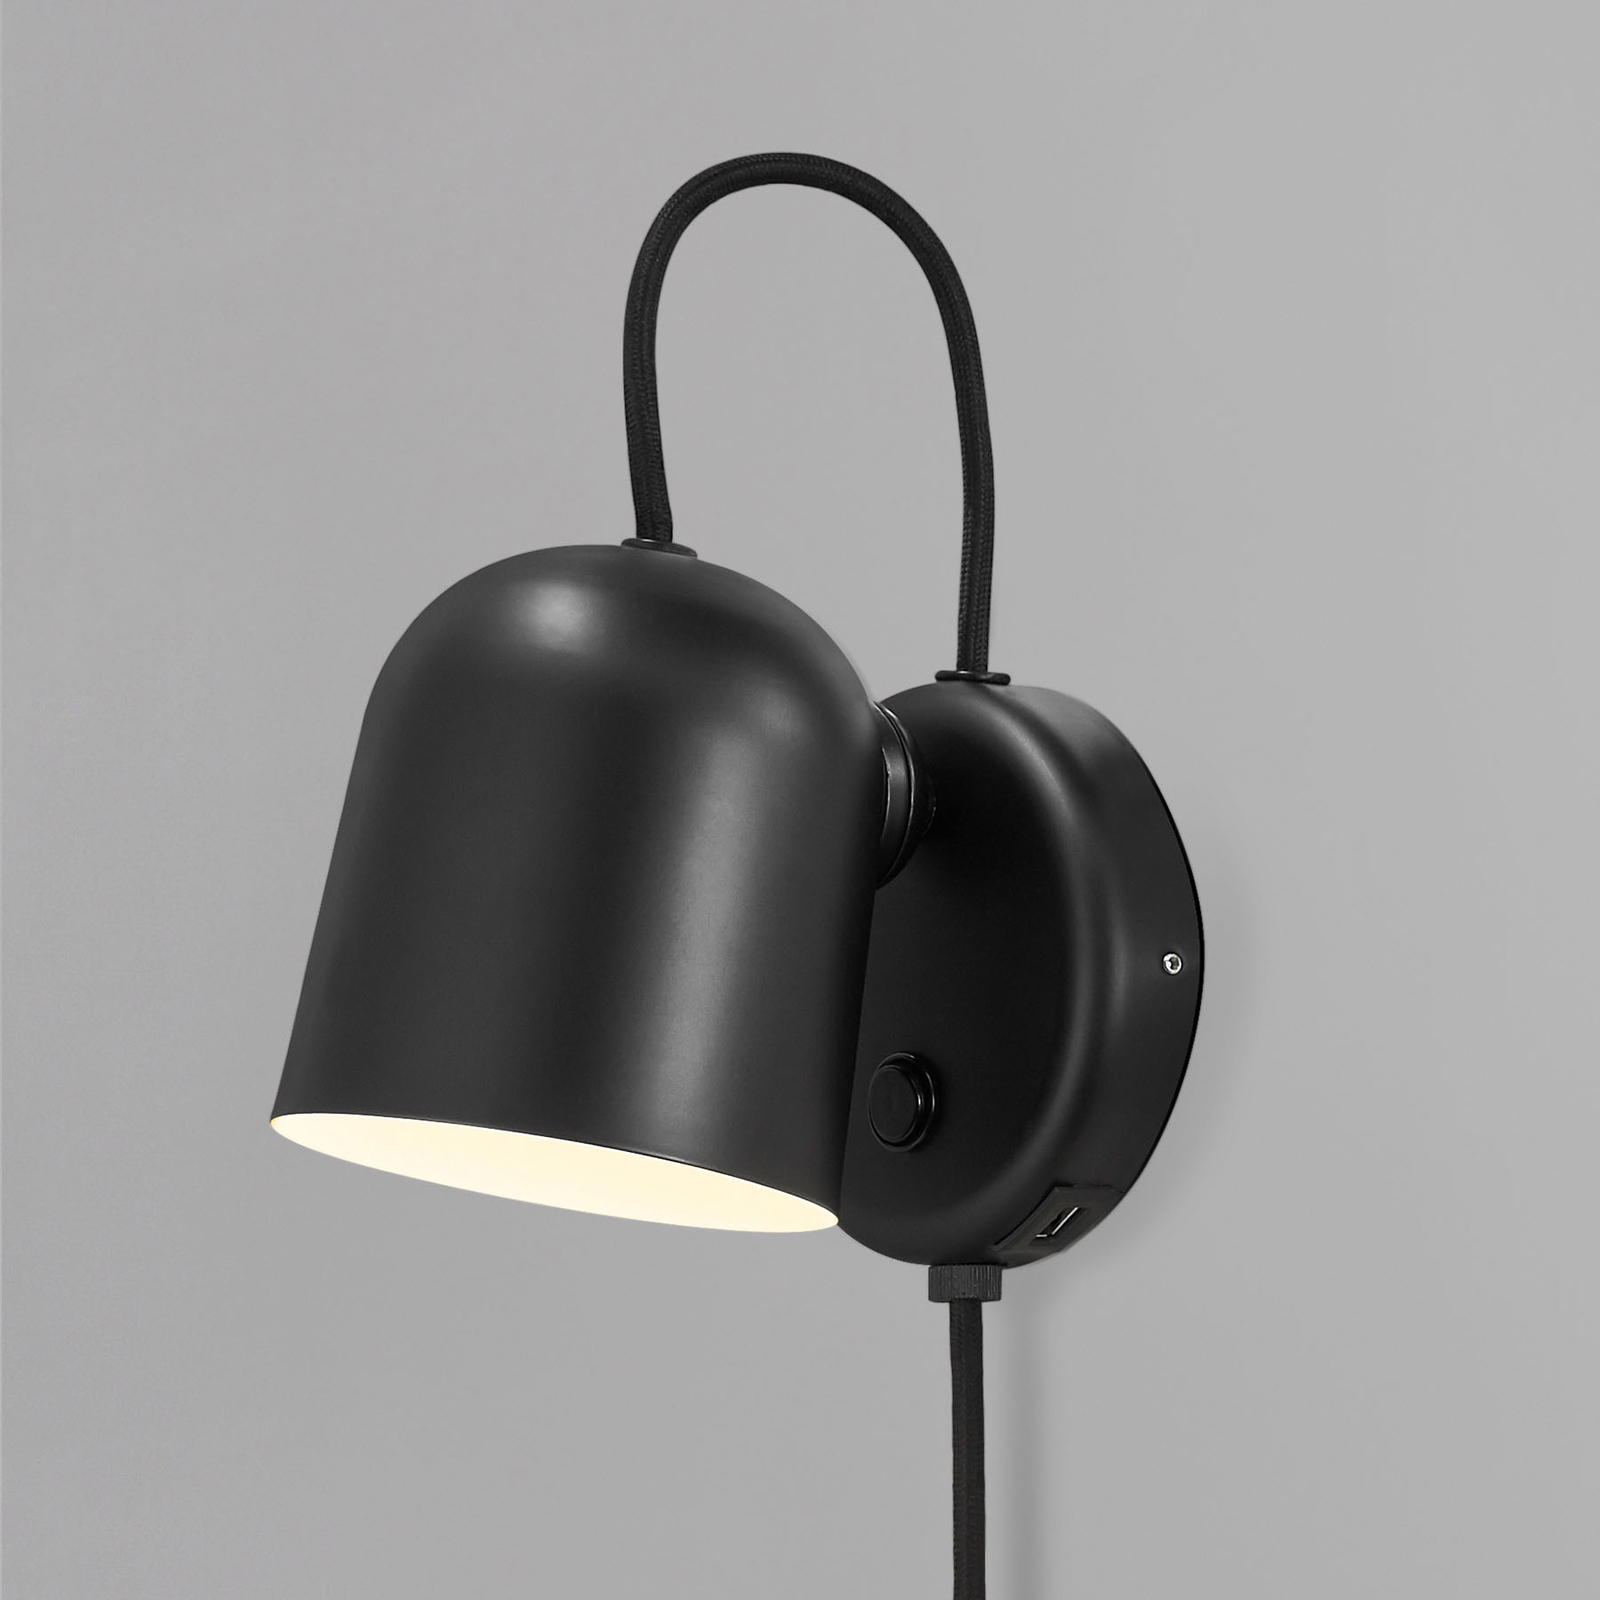 Angle wall light, with toggle switch, black